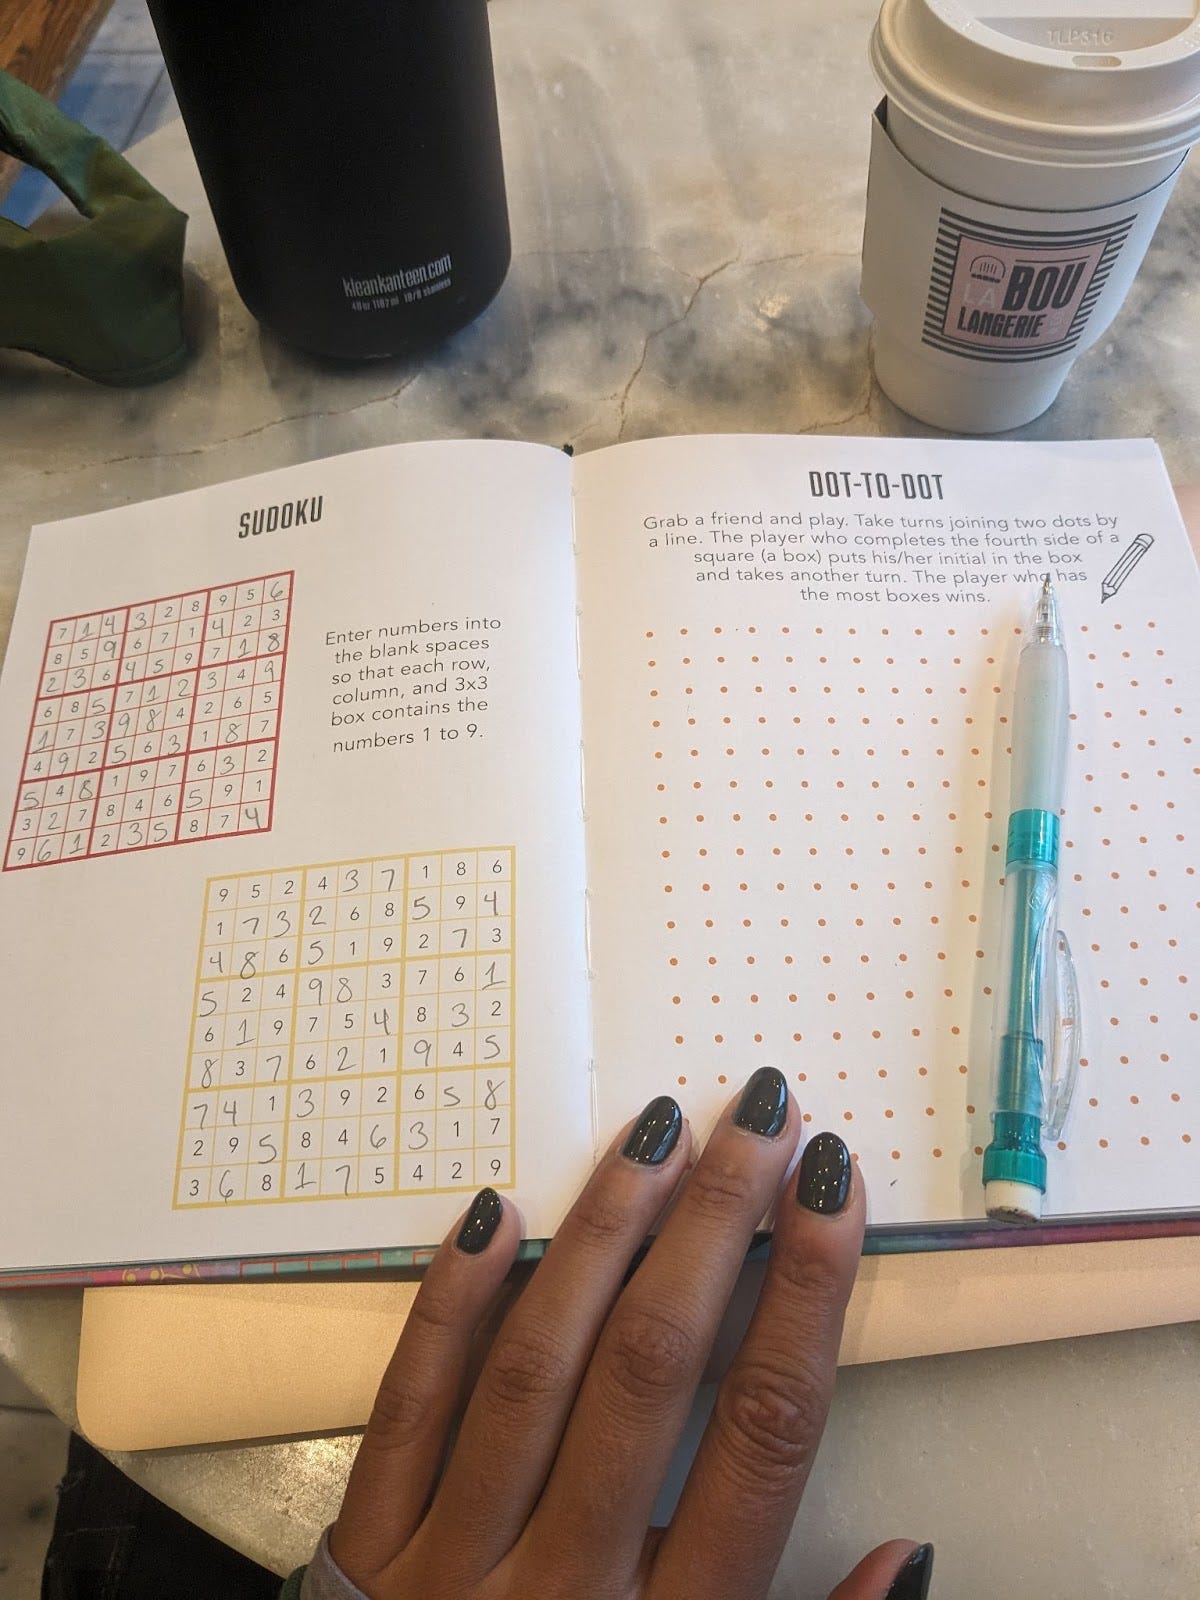 A book with the page turned to 2 sudoku puzzles. A coffee cup that says "boulangerie" on it is by the book.